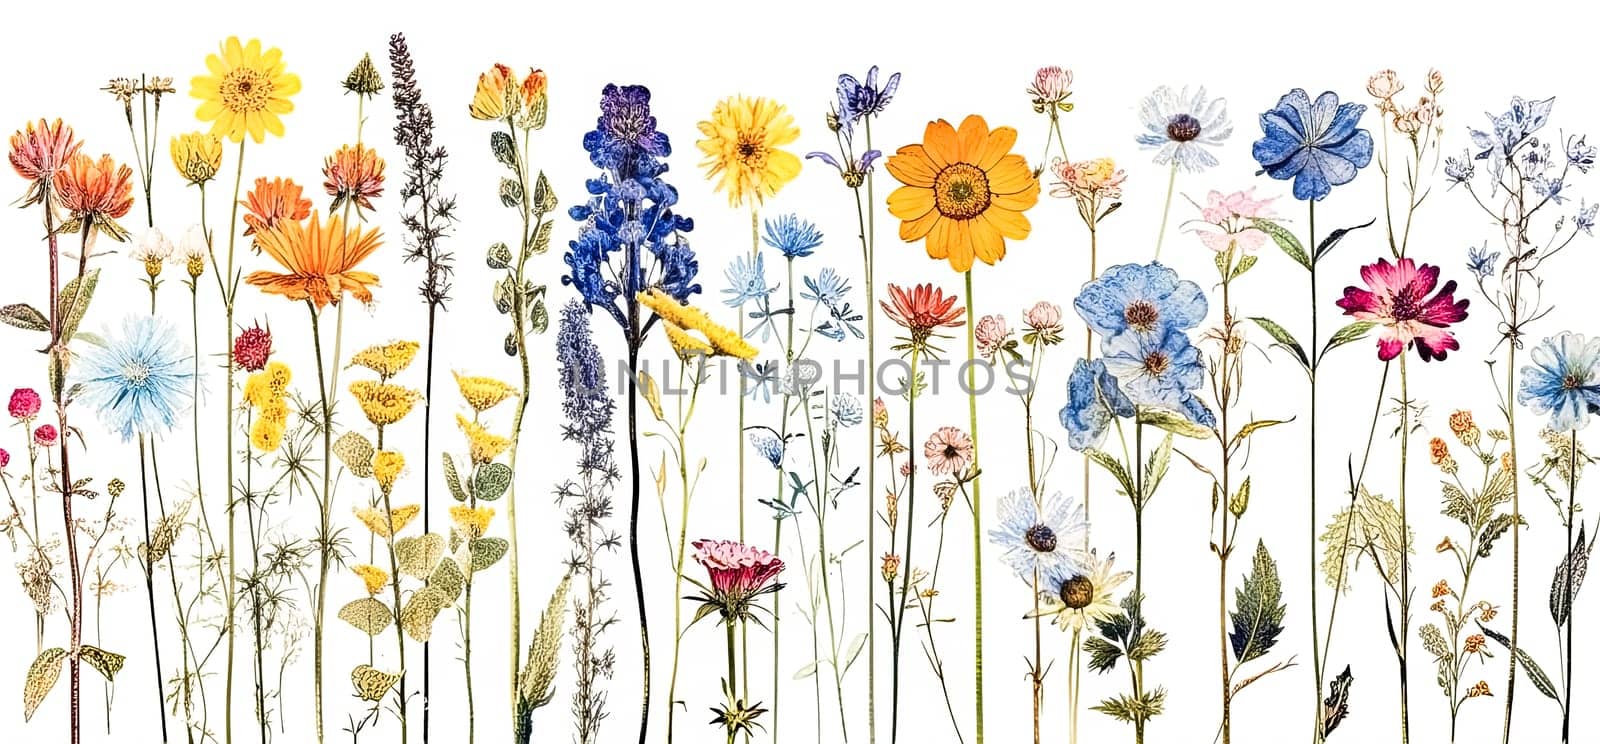 A stunning set of beautiful dried meadow flowers showcased against a white background. Perfect for various design projects and floral arrangements.